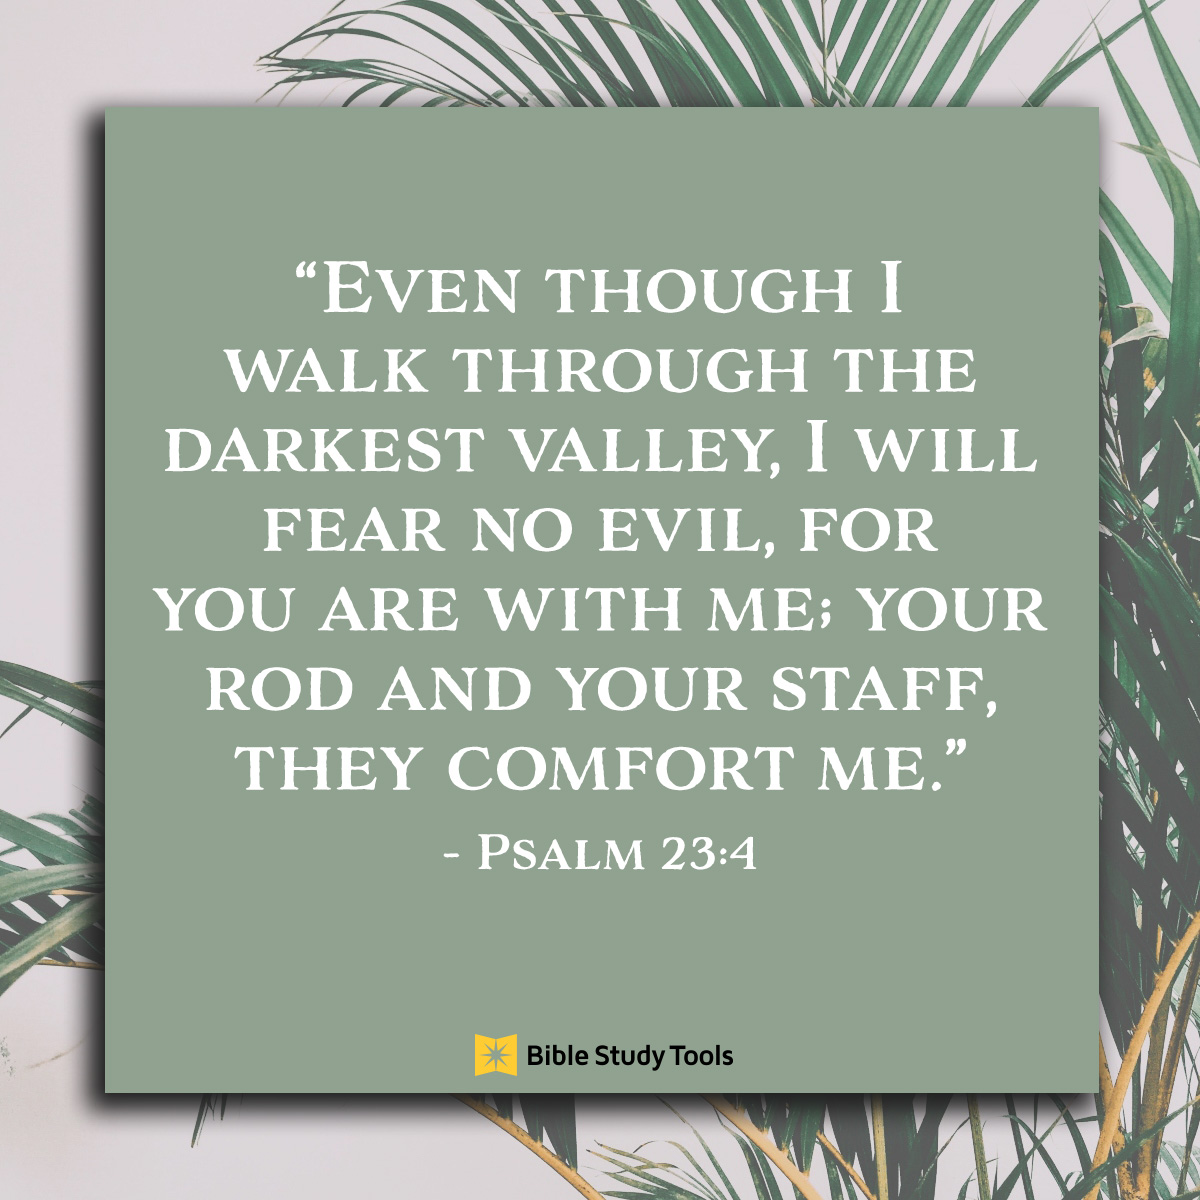 You Are With Me (Psalm 23:4)